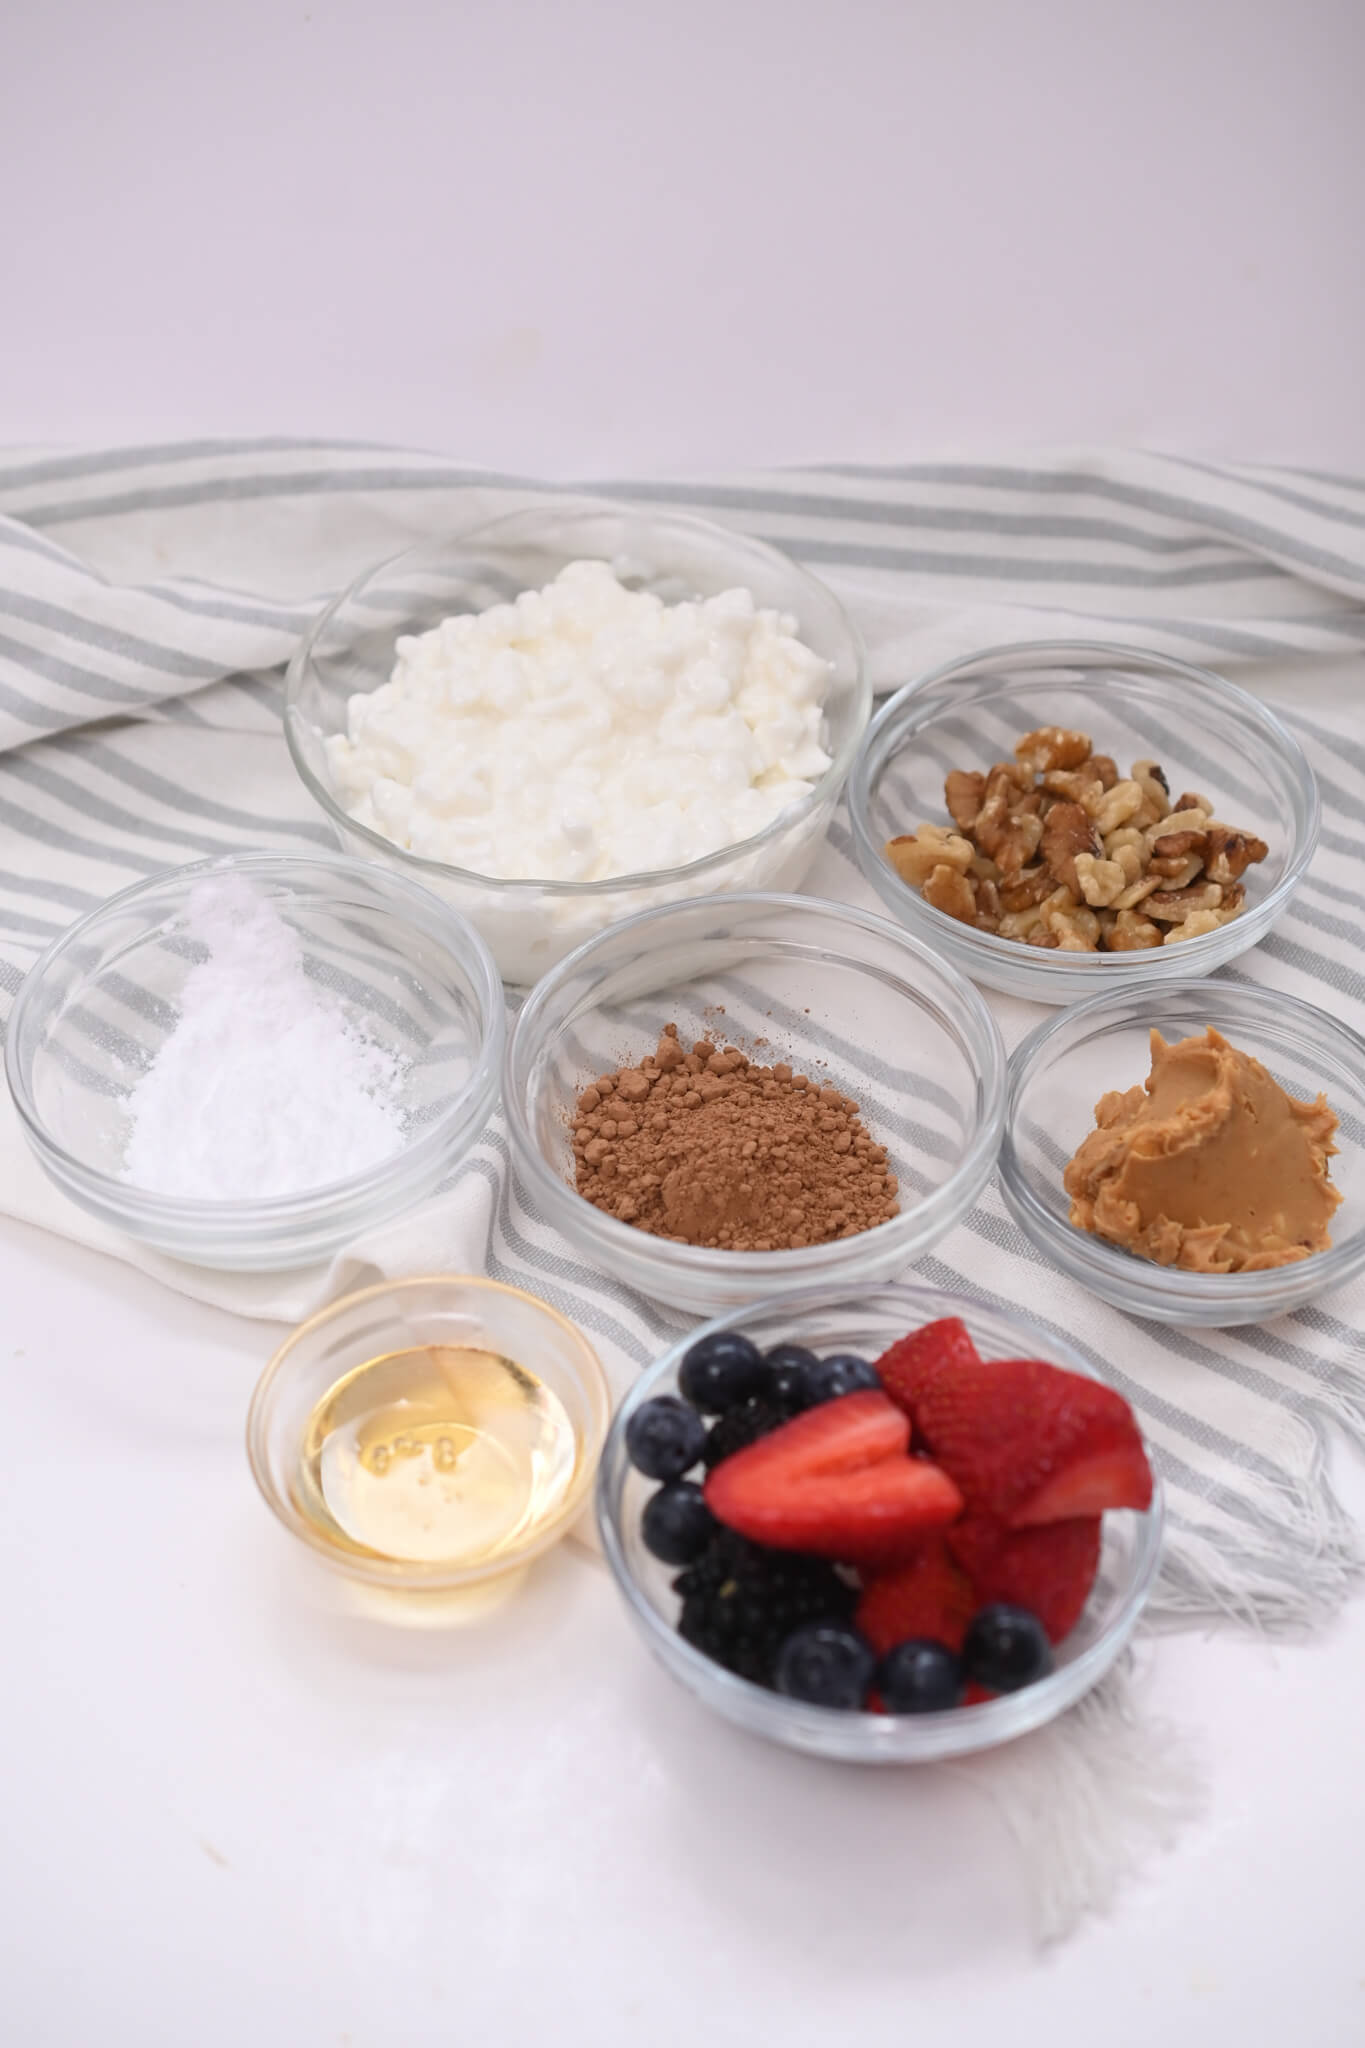 Cottage cheese, fruit, chocolate and ingredients for the bowl.